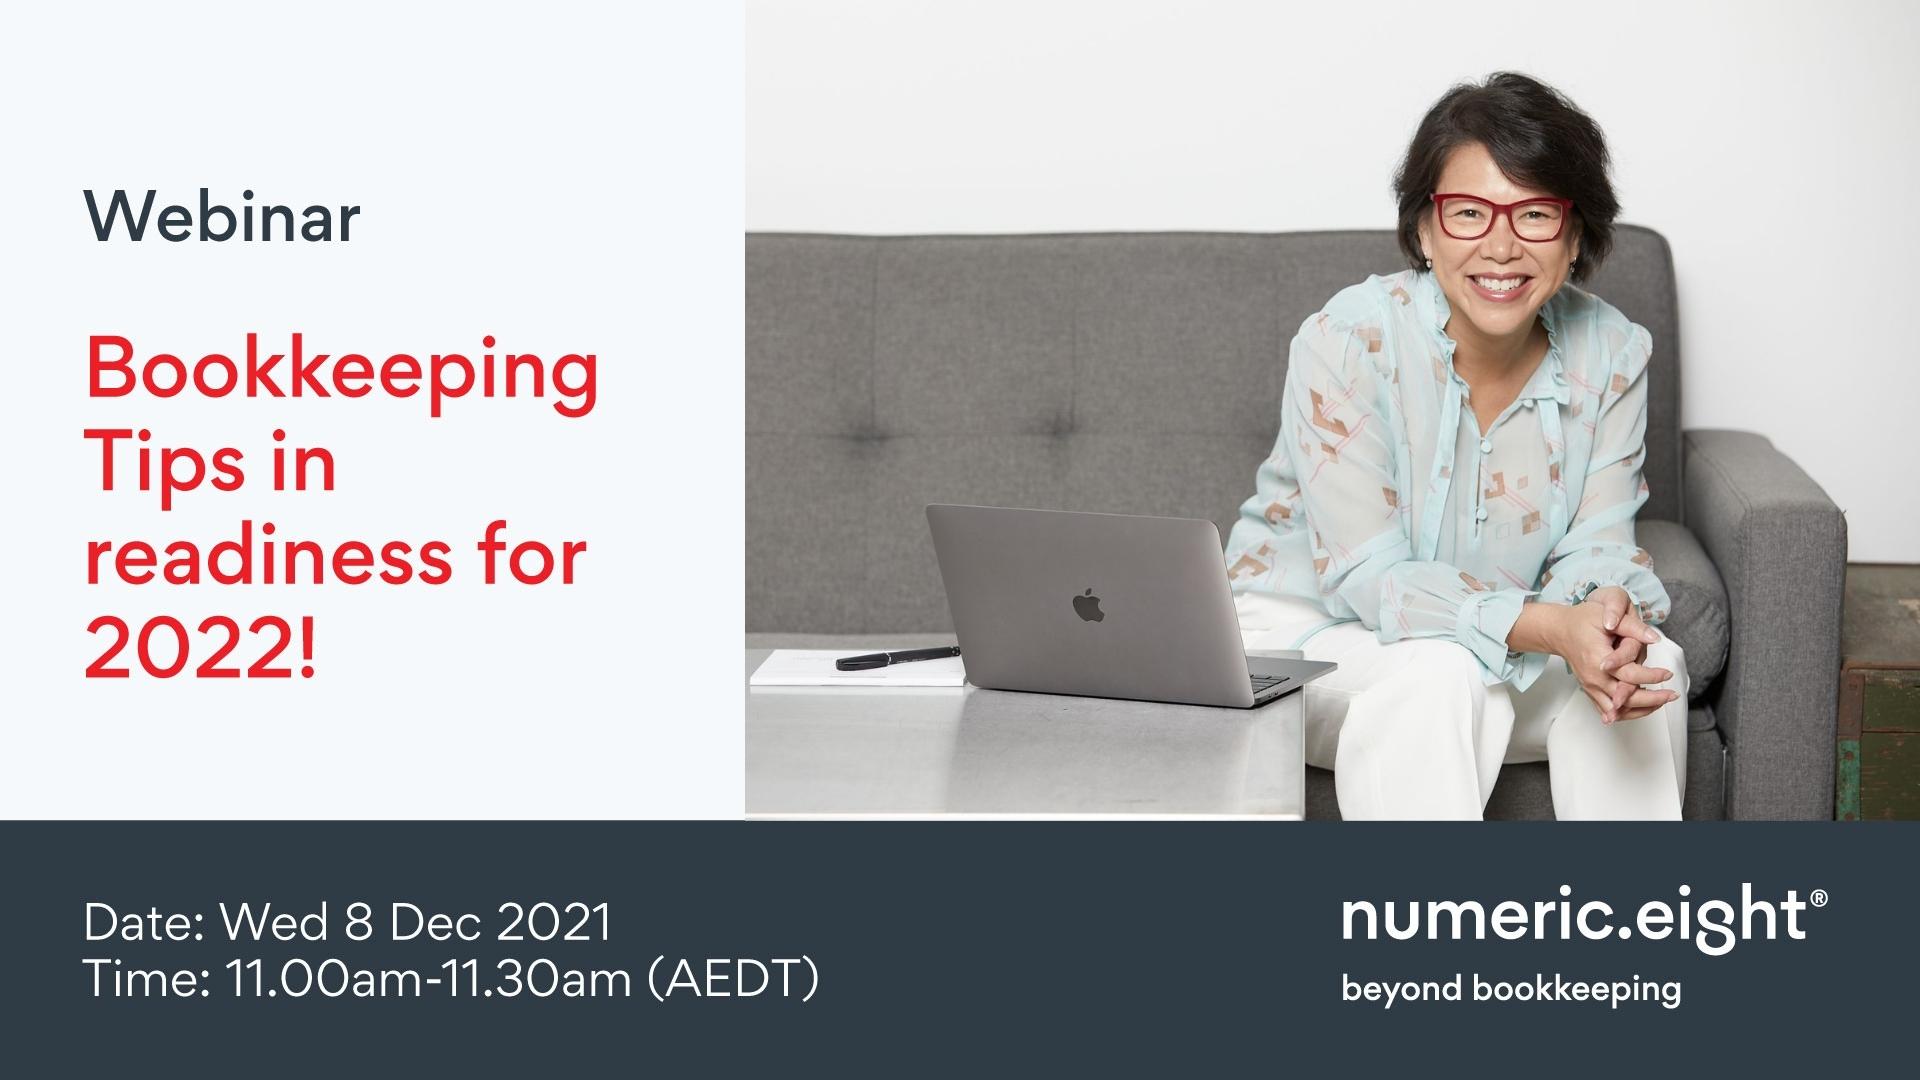 Webinar-graphic---Bookkeeping-Tips-in-readiness-for-2022-8-Dec-2021-updated